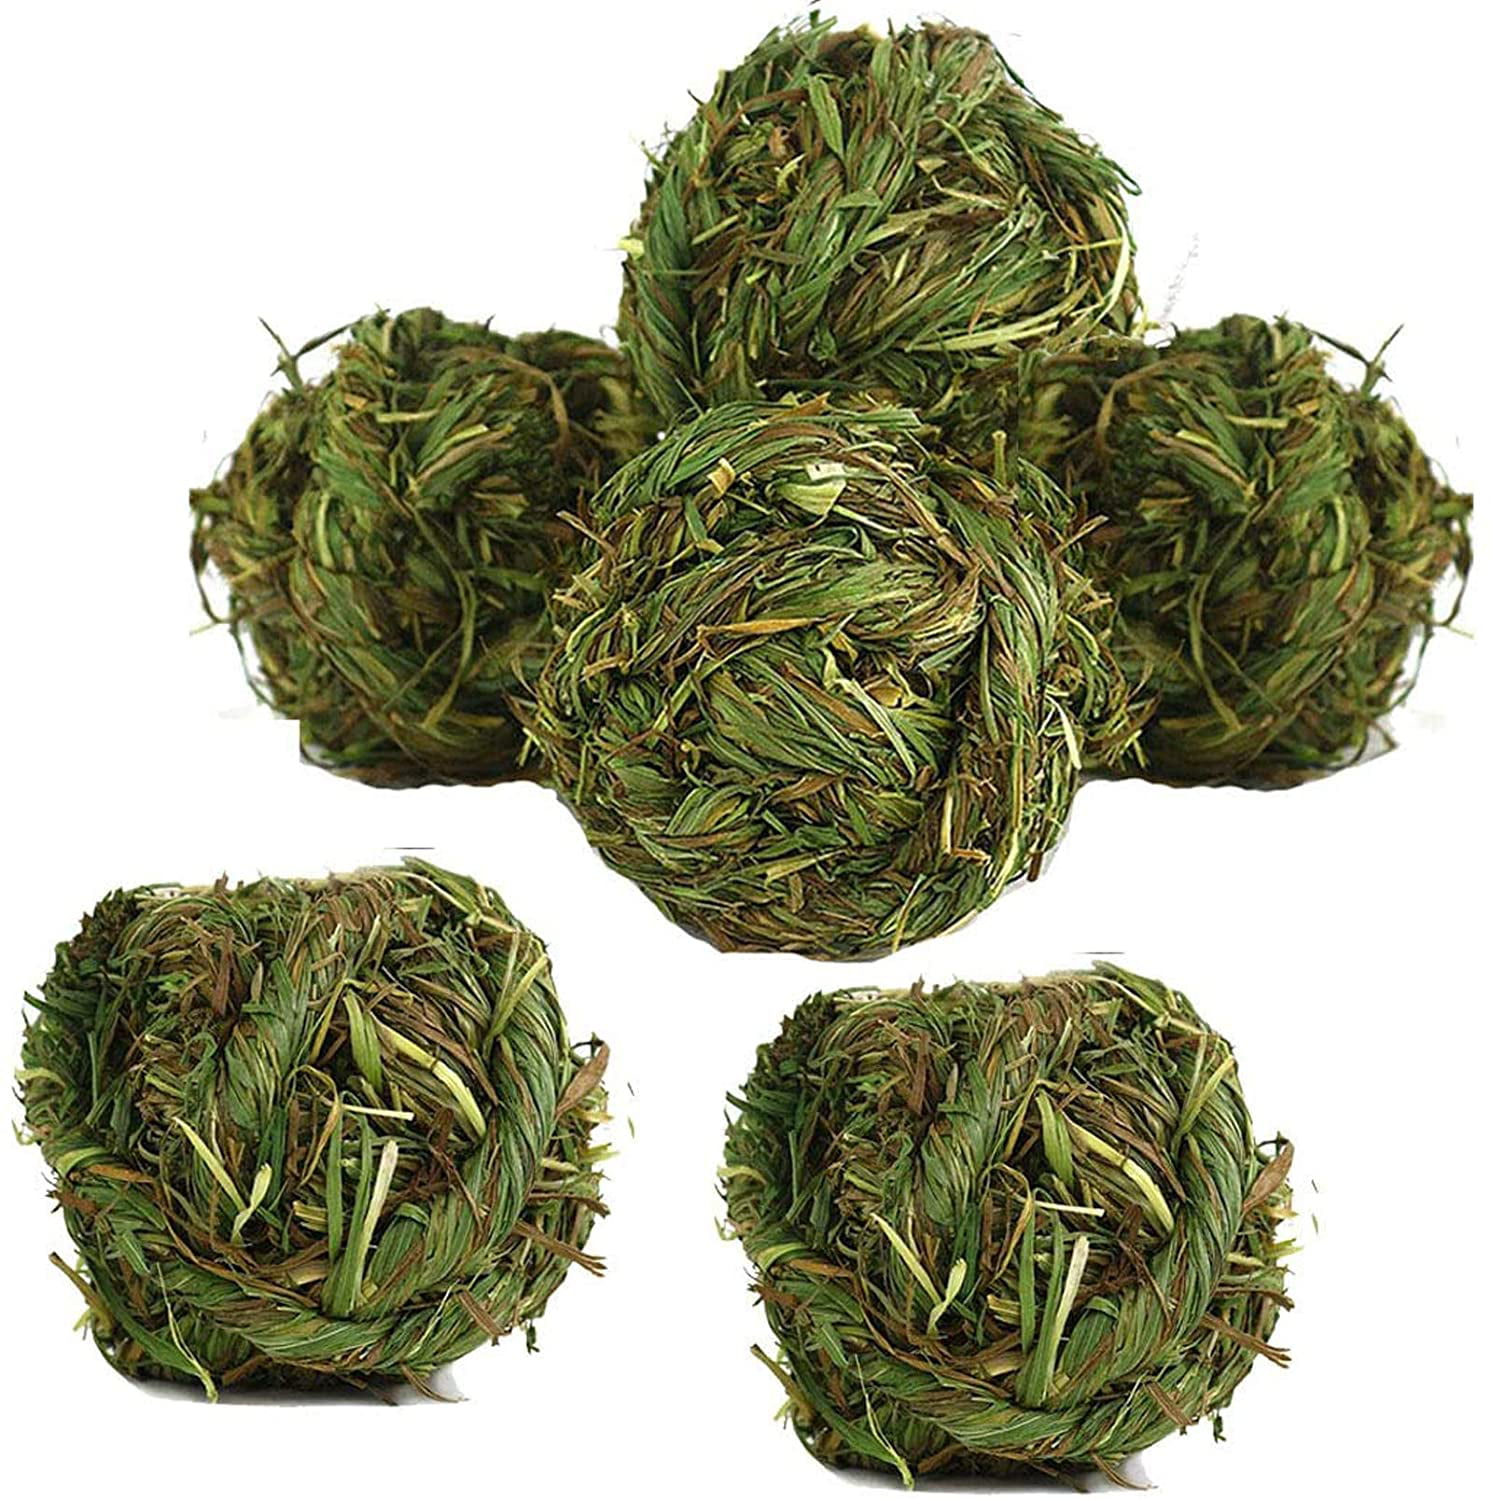 PINVNBY 6 Pack Rabbit Chew Grass Balls Bunny Natural Timothy Woven Grass Ball Teeth Grinding Activity Play for Chinchillas,Hamster,Guinea Pigs,Gerbils and Other Small Animal 